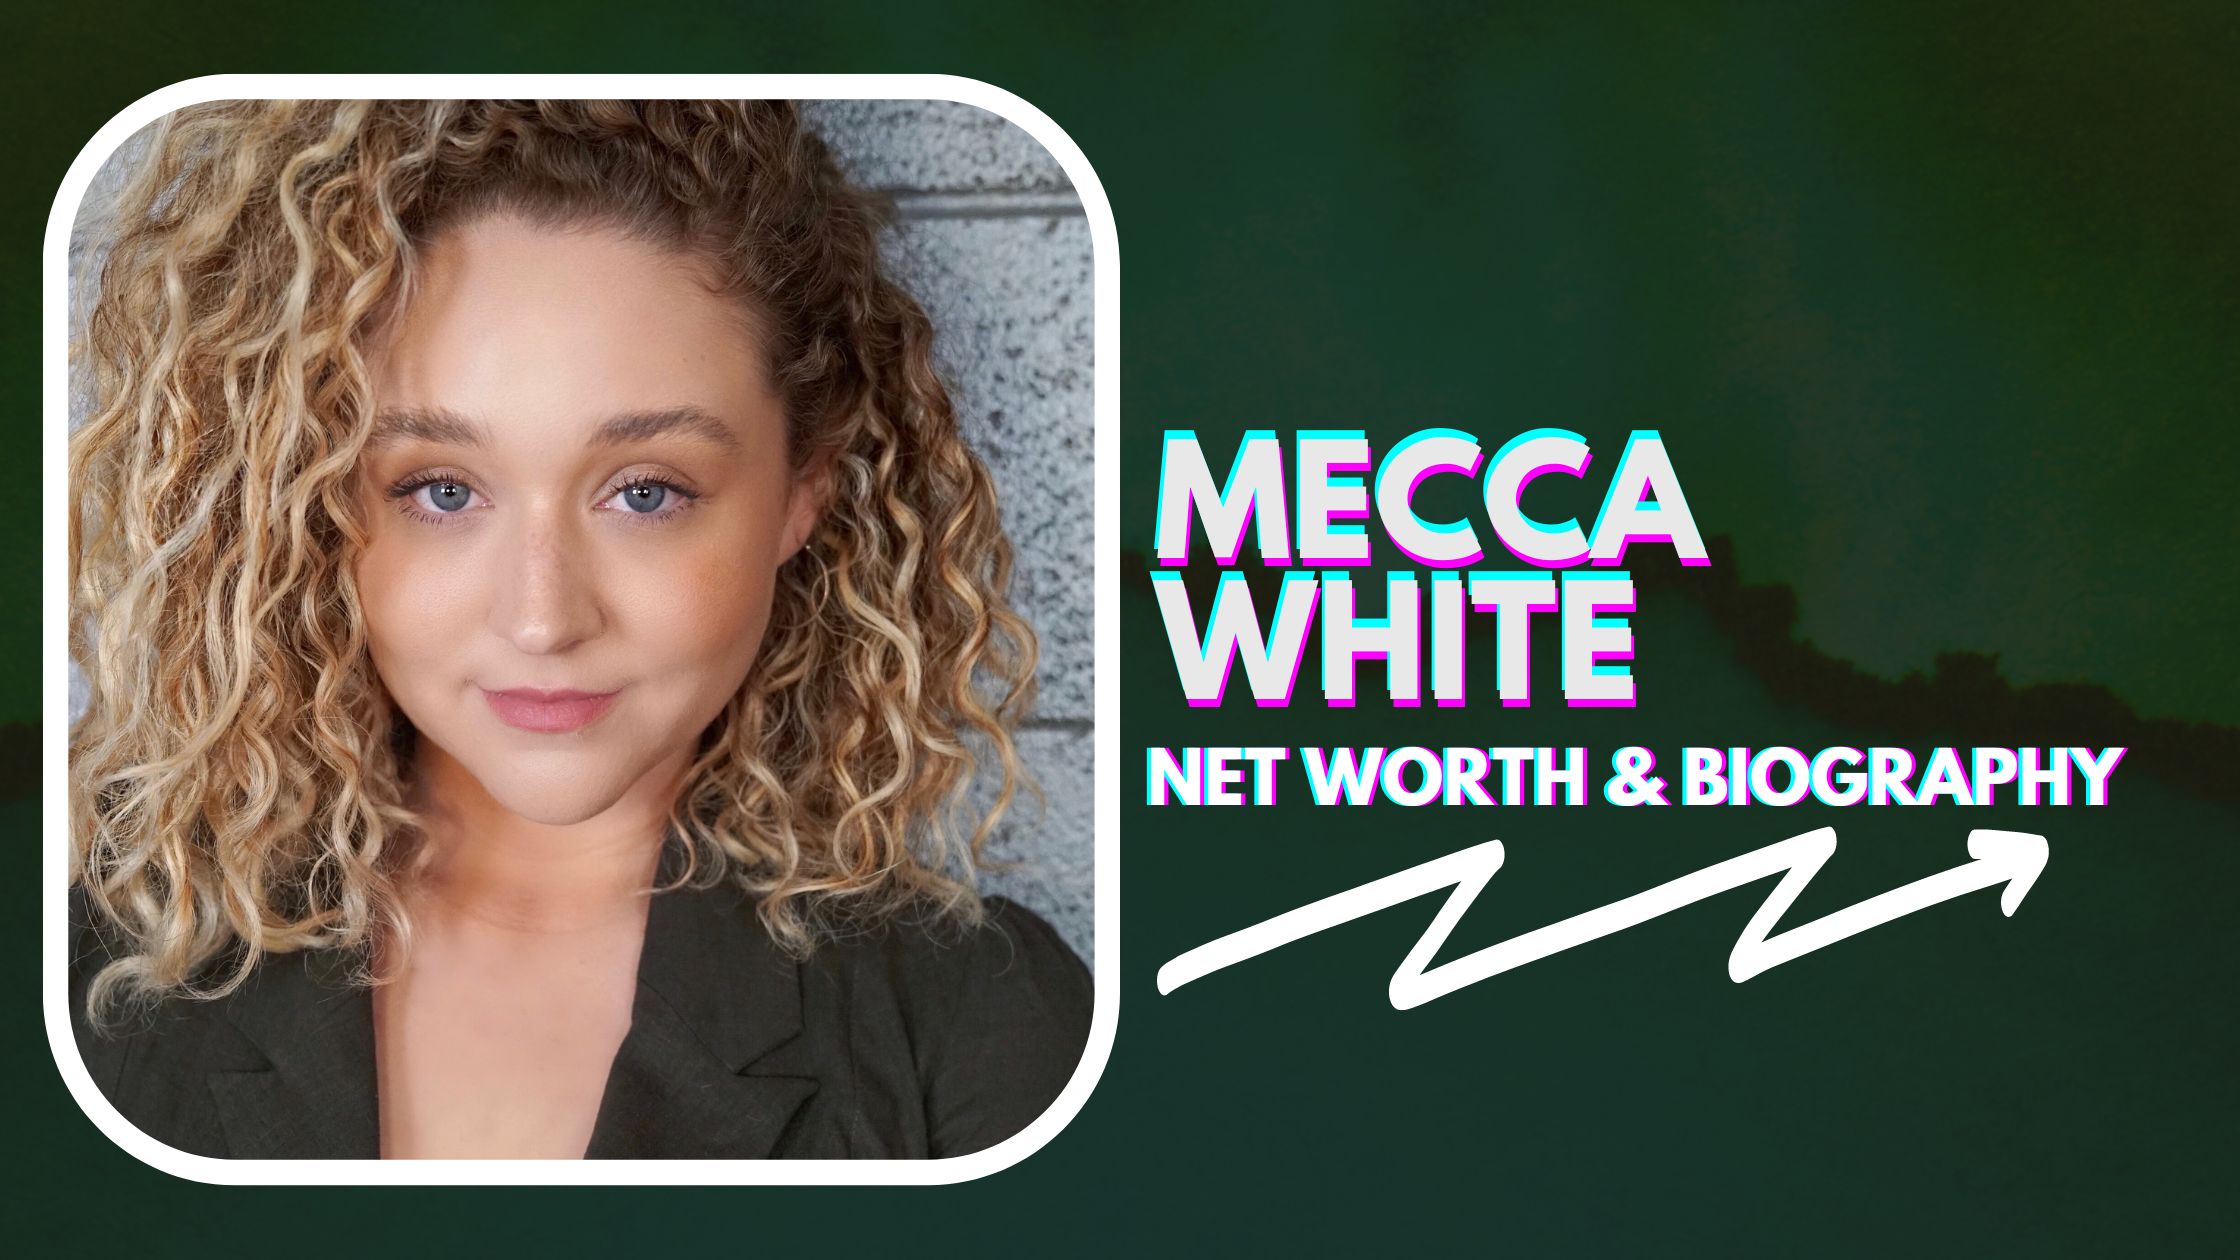 Mecca White Net worth and biography